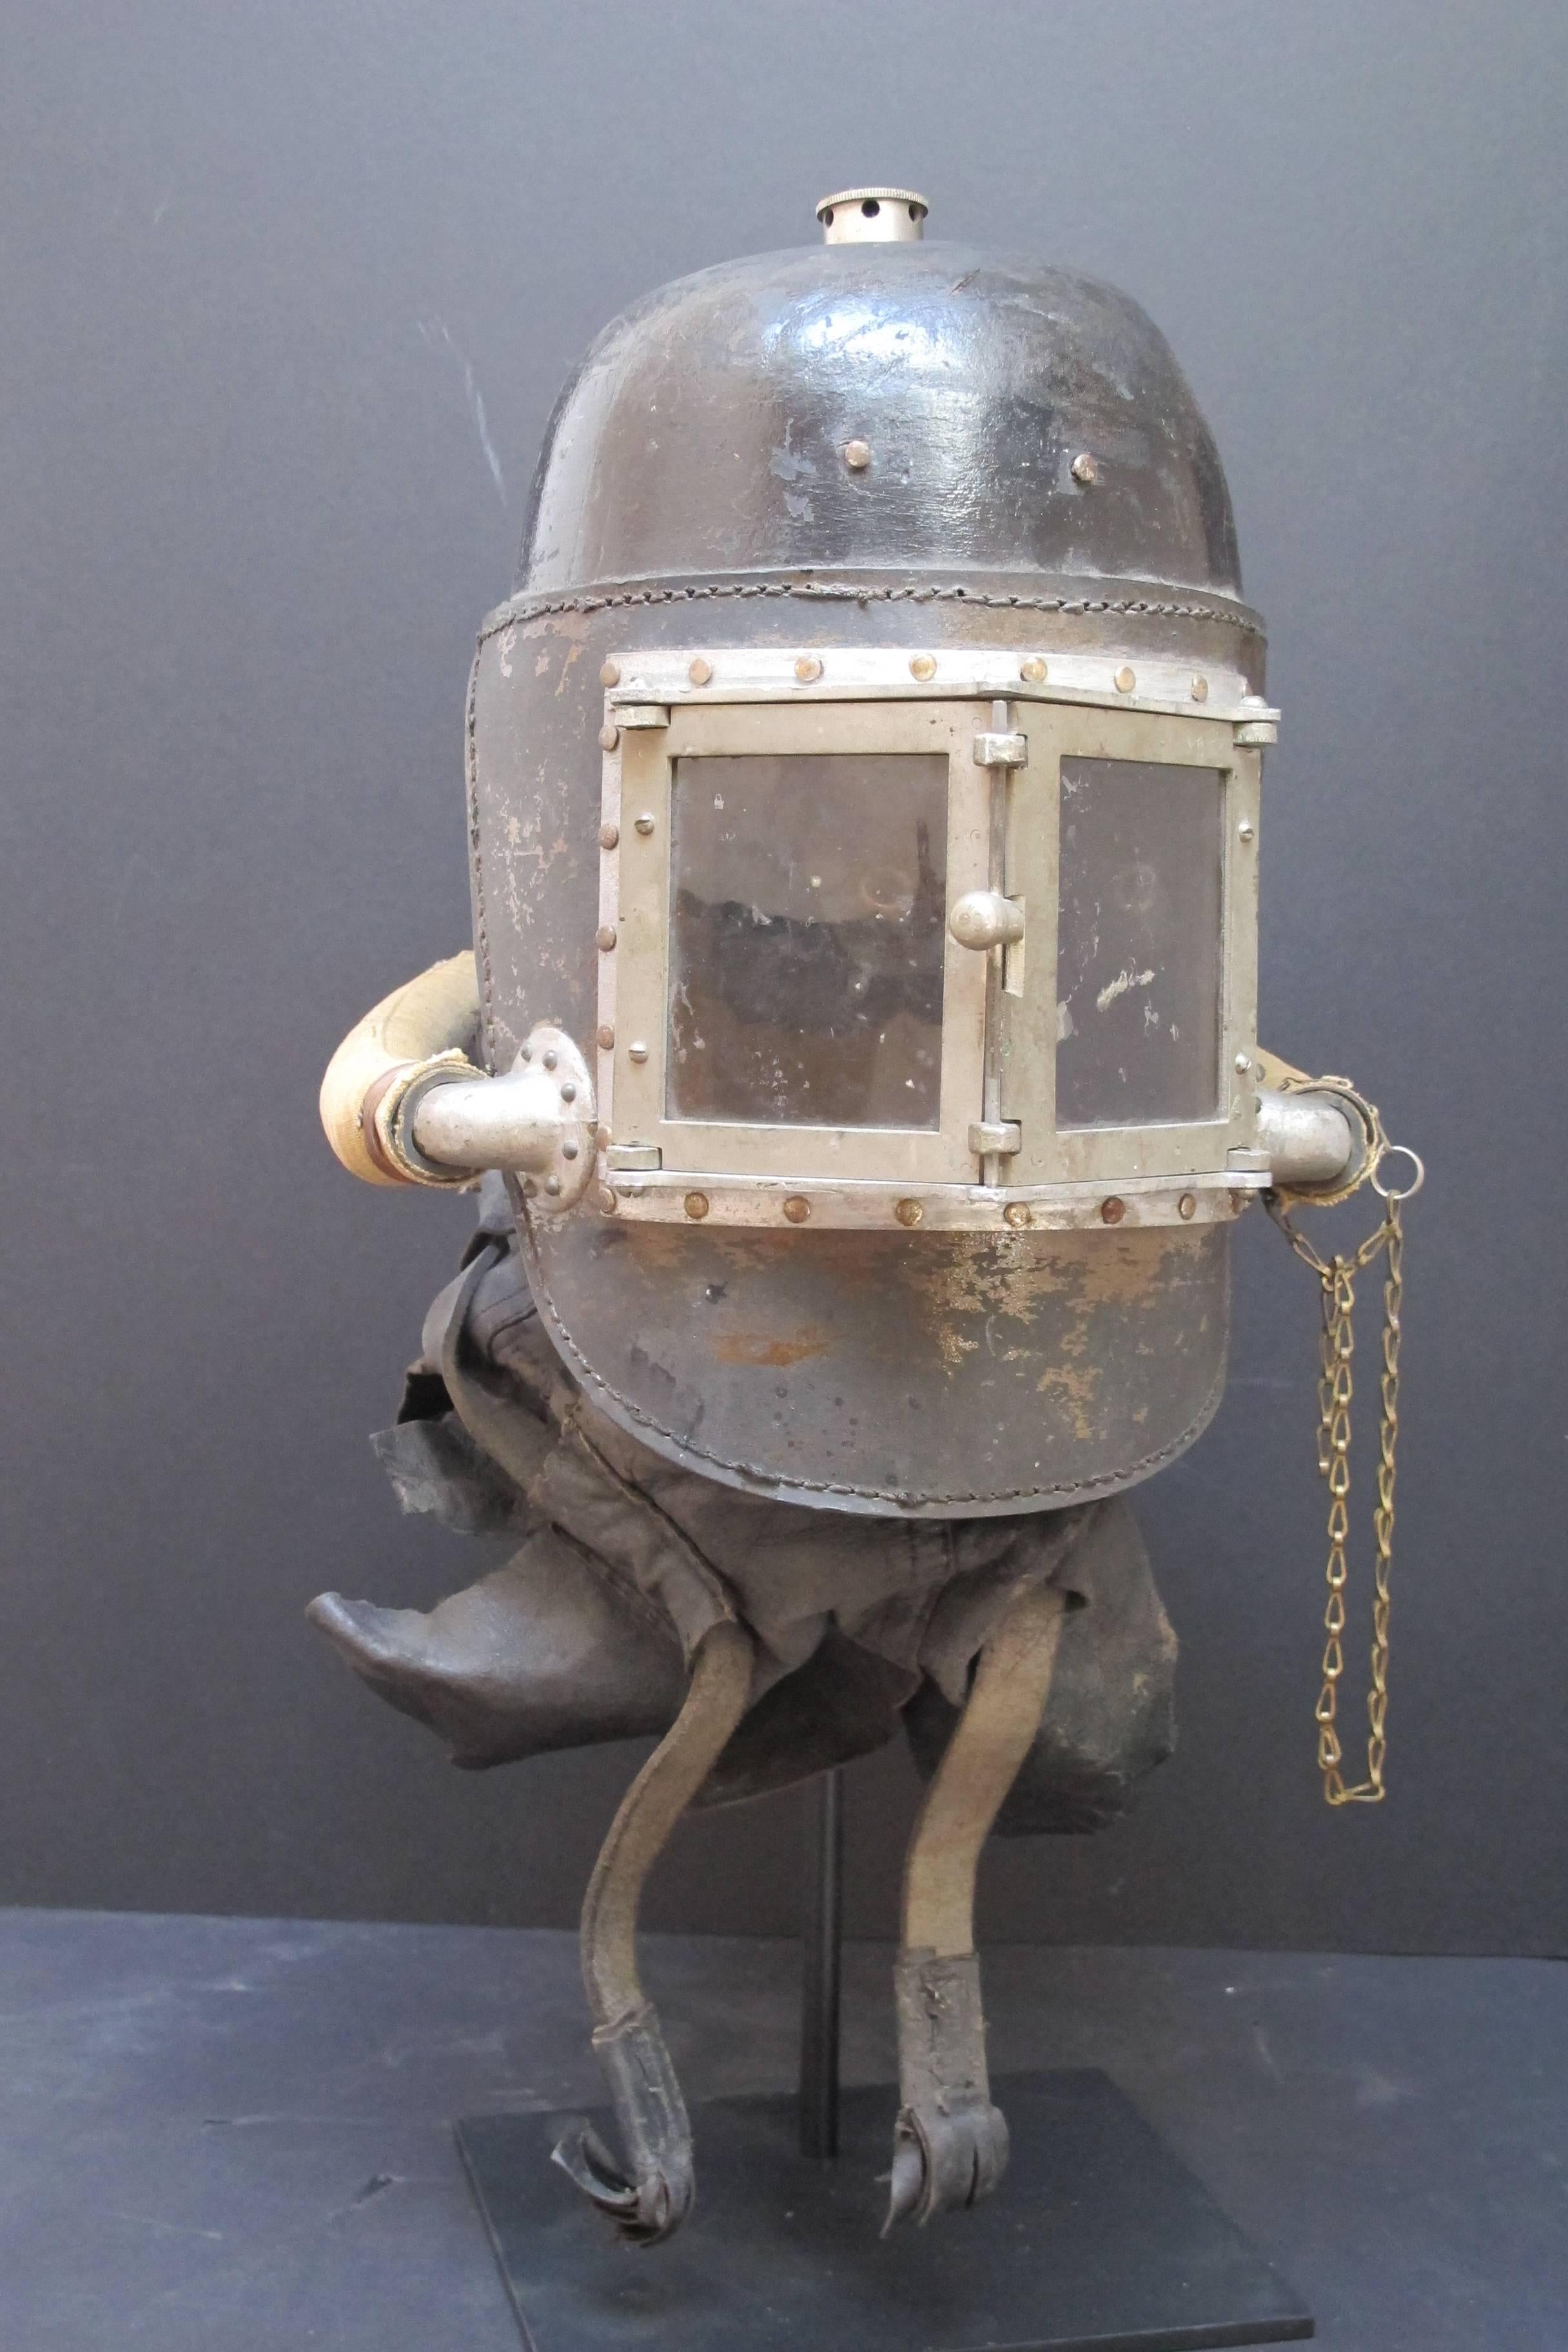 Unusual smoke helmet with a pair of hinged eye windows with mica to protect the eyes and open for needed viewing. The helmet retains the double hoses coming to the back which supplied fresh air from someone on the outside that operated a foot pedal